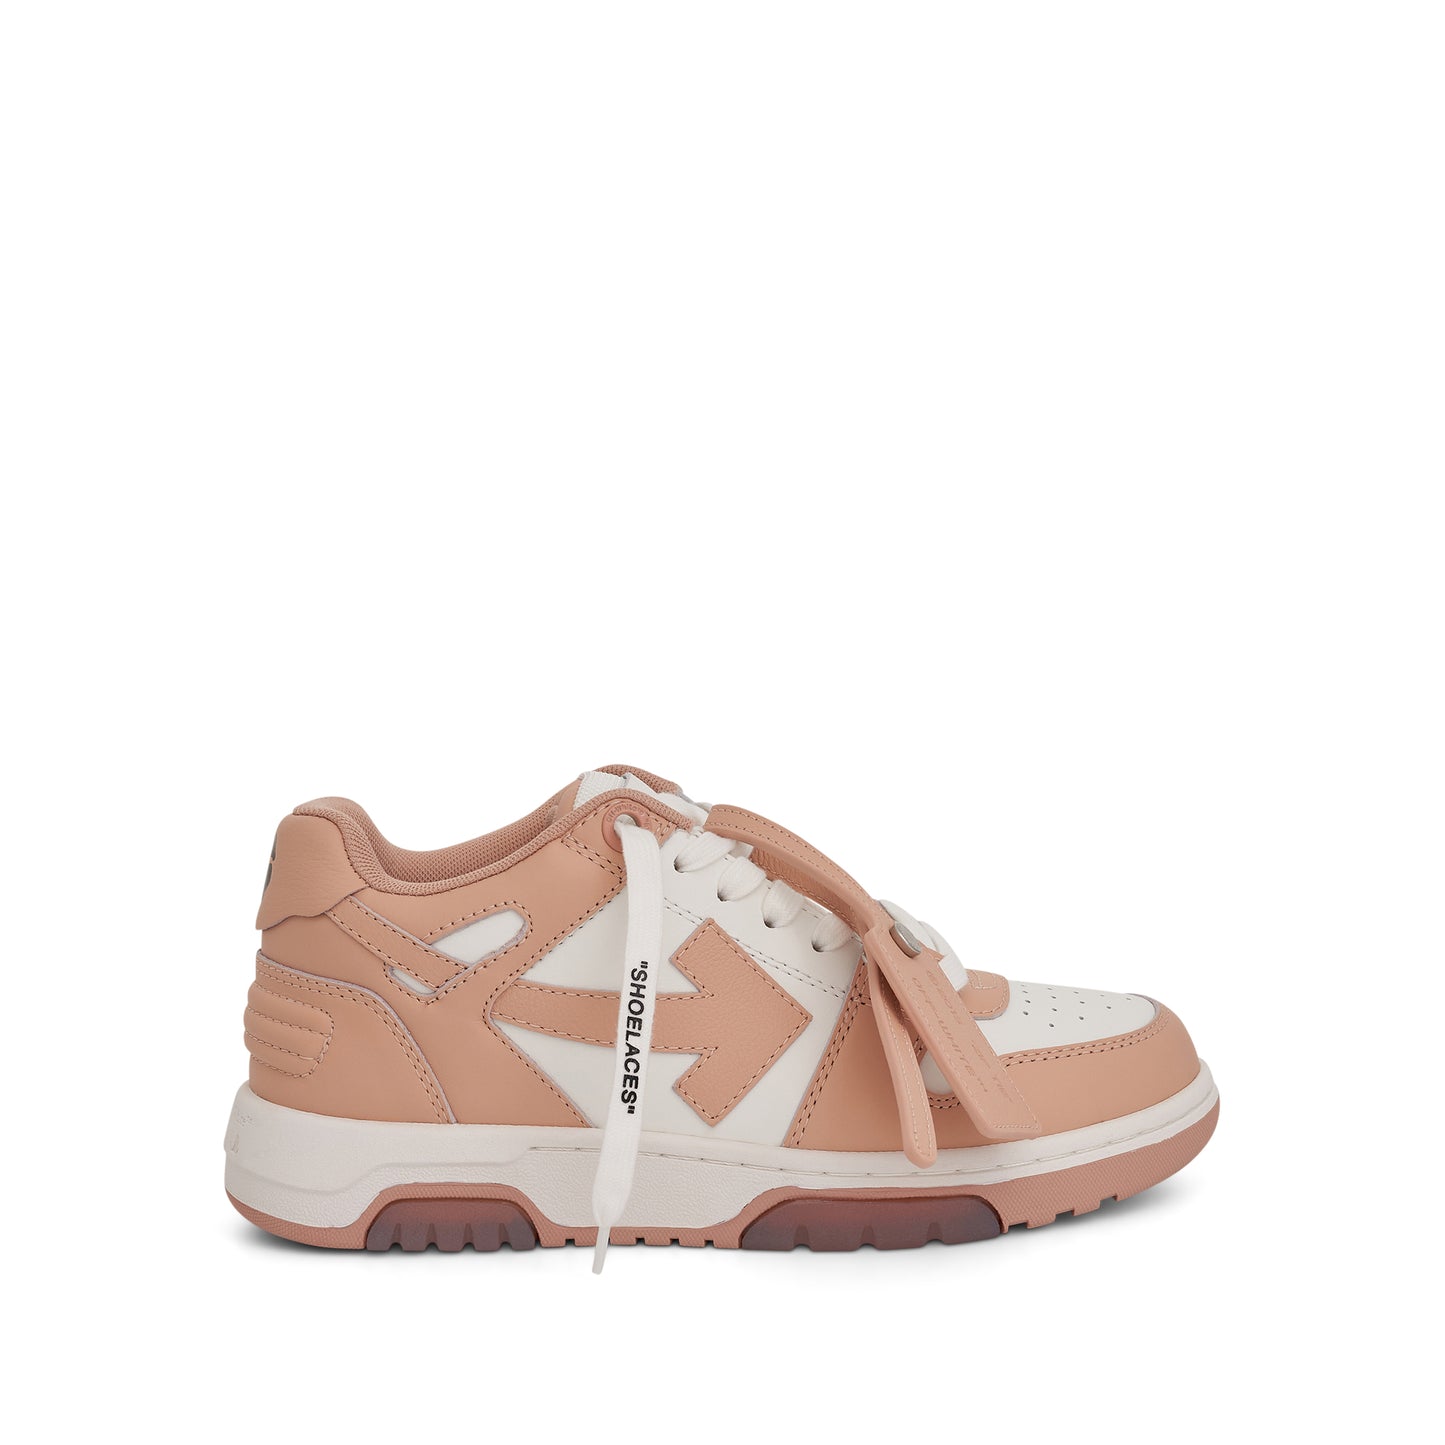 Out Of Office Sneaker in White/Light Pink